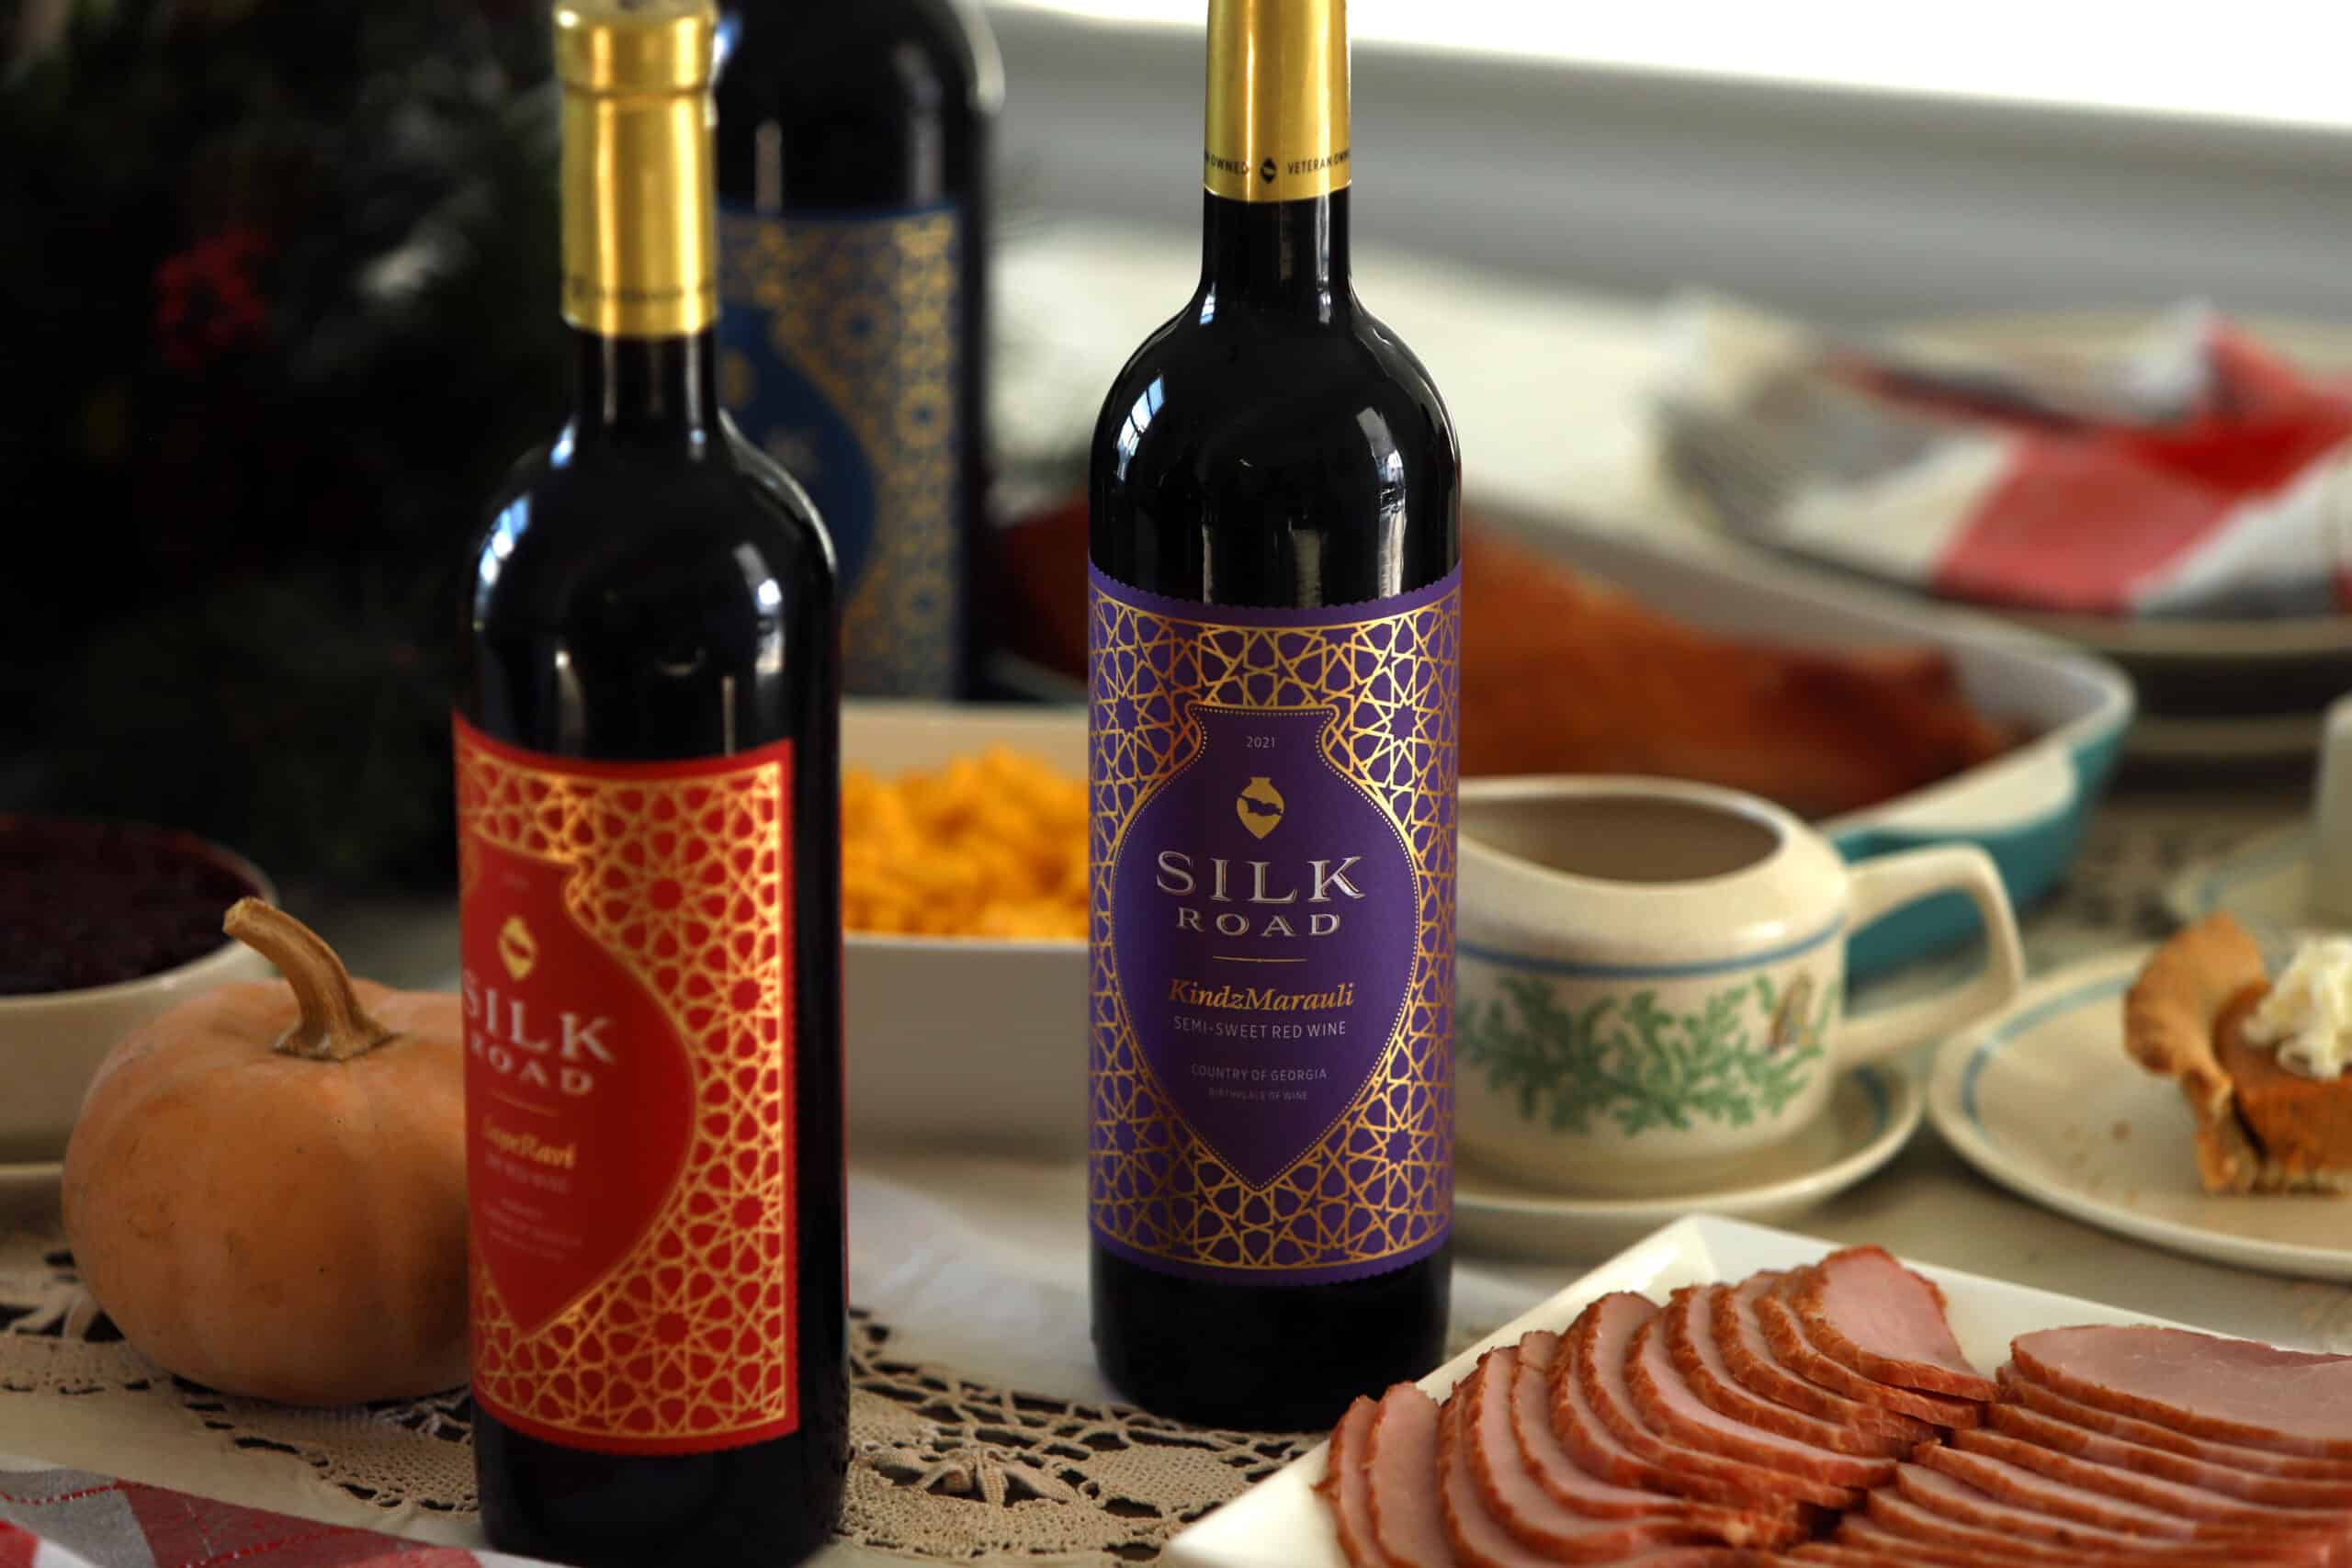 Kindz and Saperavi wines from Georgia are perfect for the Holidays